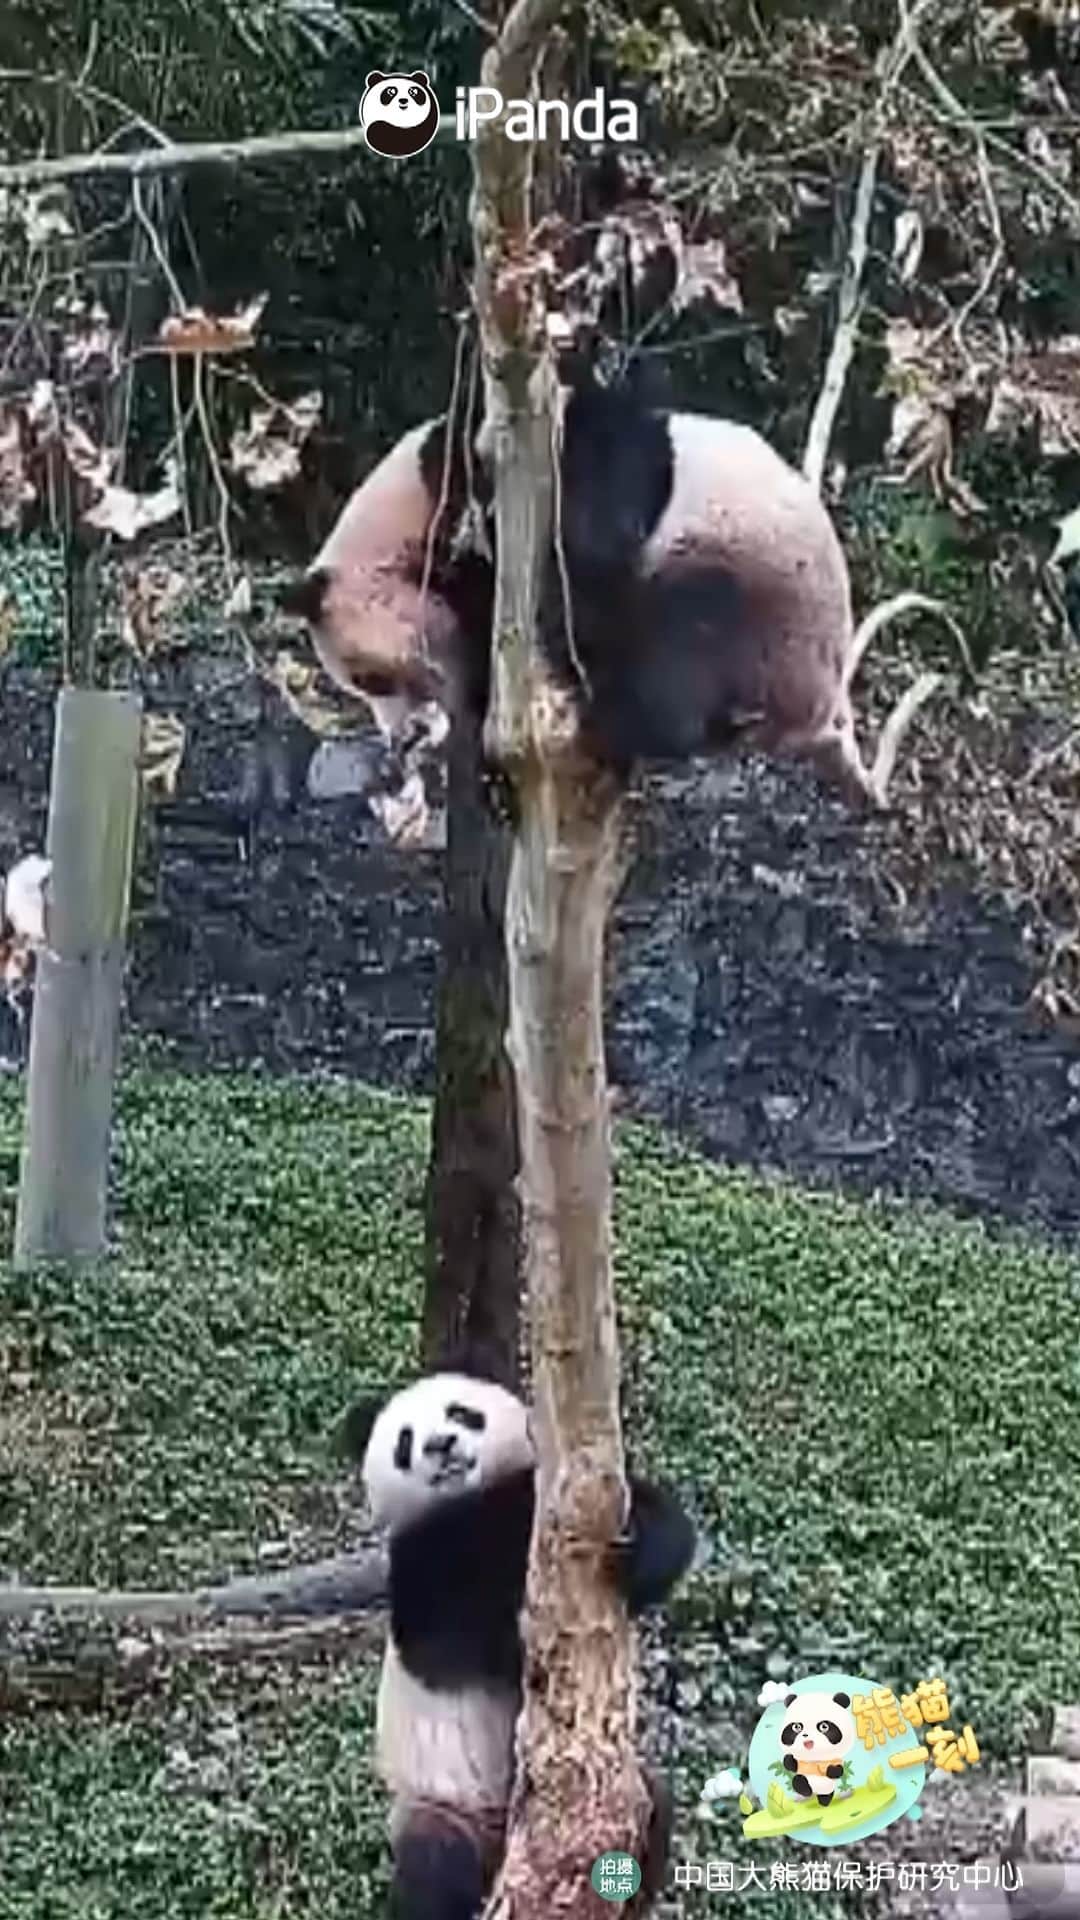 iPandaのインスタグラム：「Mr. Tree just told me he can't hold more pandas. Why don't you find your own tree? (Qing Lu & Qing Lu) 🐼 🐼 🐼 #Panda #iPanda #Cute #HiPanda #CCRCGP #PandaMoment  For more panda information, please check out: https://en.ipanda.com」